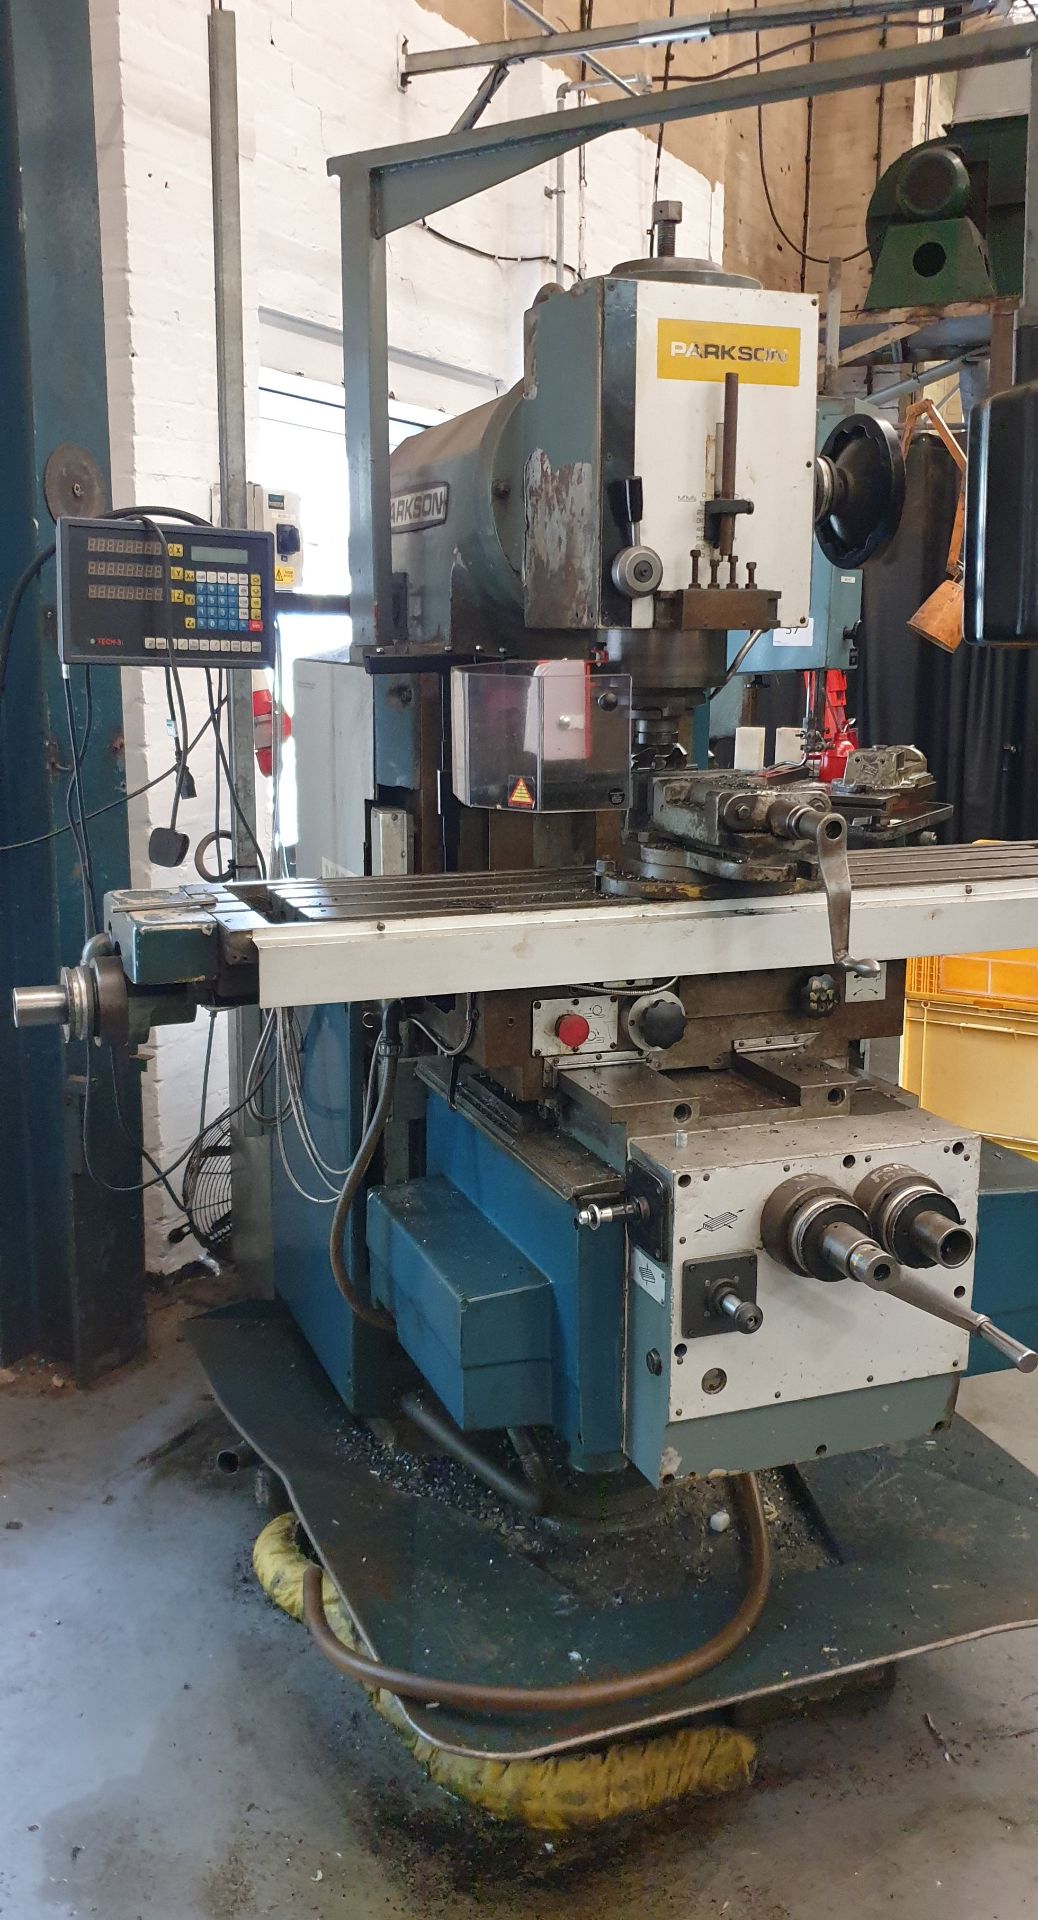 Parkson M1200 Vertical Milling Machine Fitted With A Tech 3i 3-Axis DRO, Serial Number: Unknown - Image 4 of 4